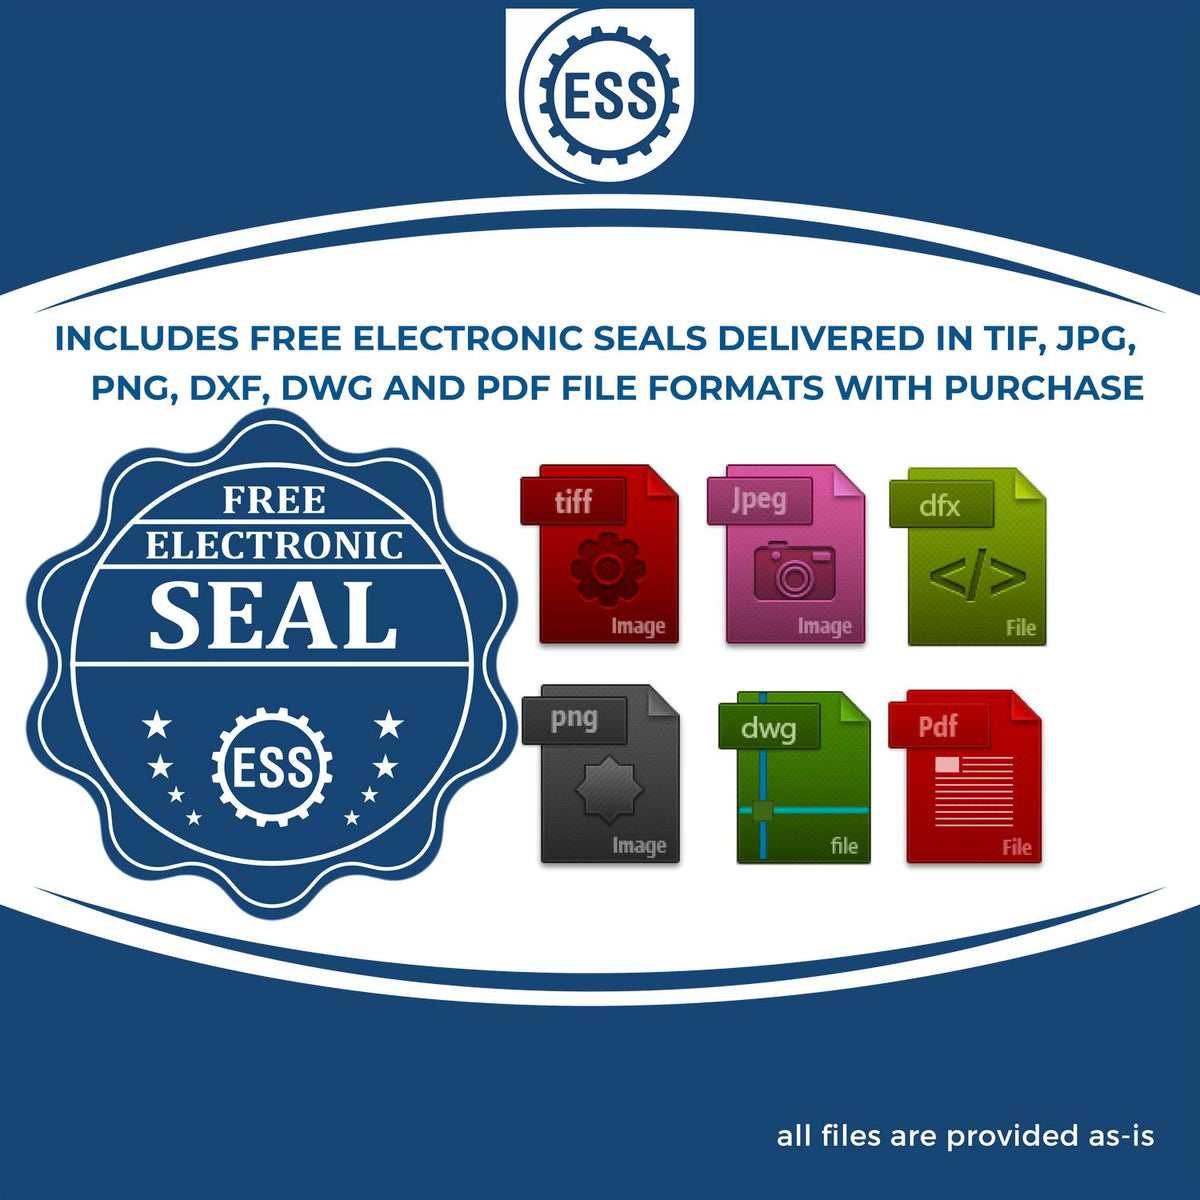 An infographic for the free electronic seal for the PSI Georgia Notary Stamp illustrating the different file type icons such as DXF, DWG, TIF, JPG and PNG.